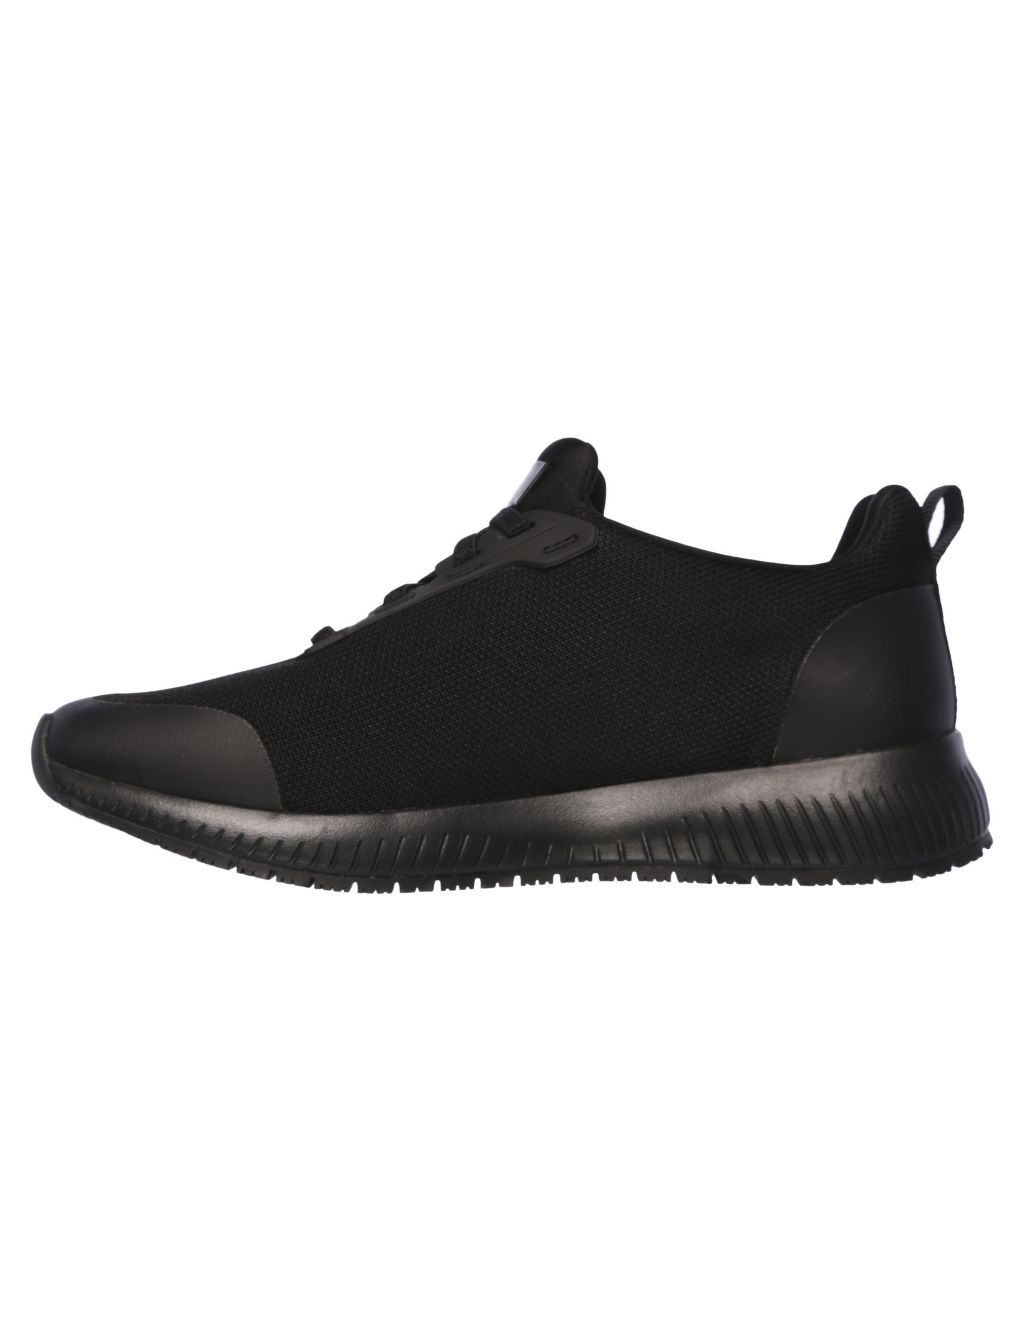 Squad SR Knitted Slip On Trainers image 5